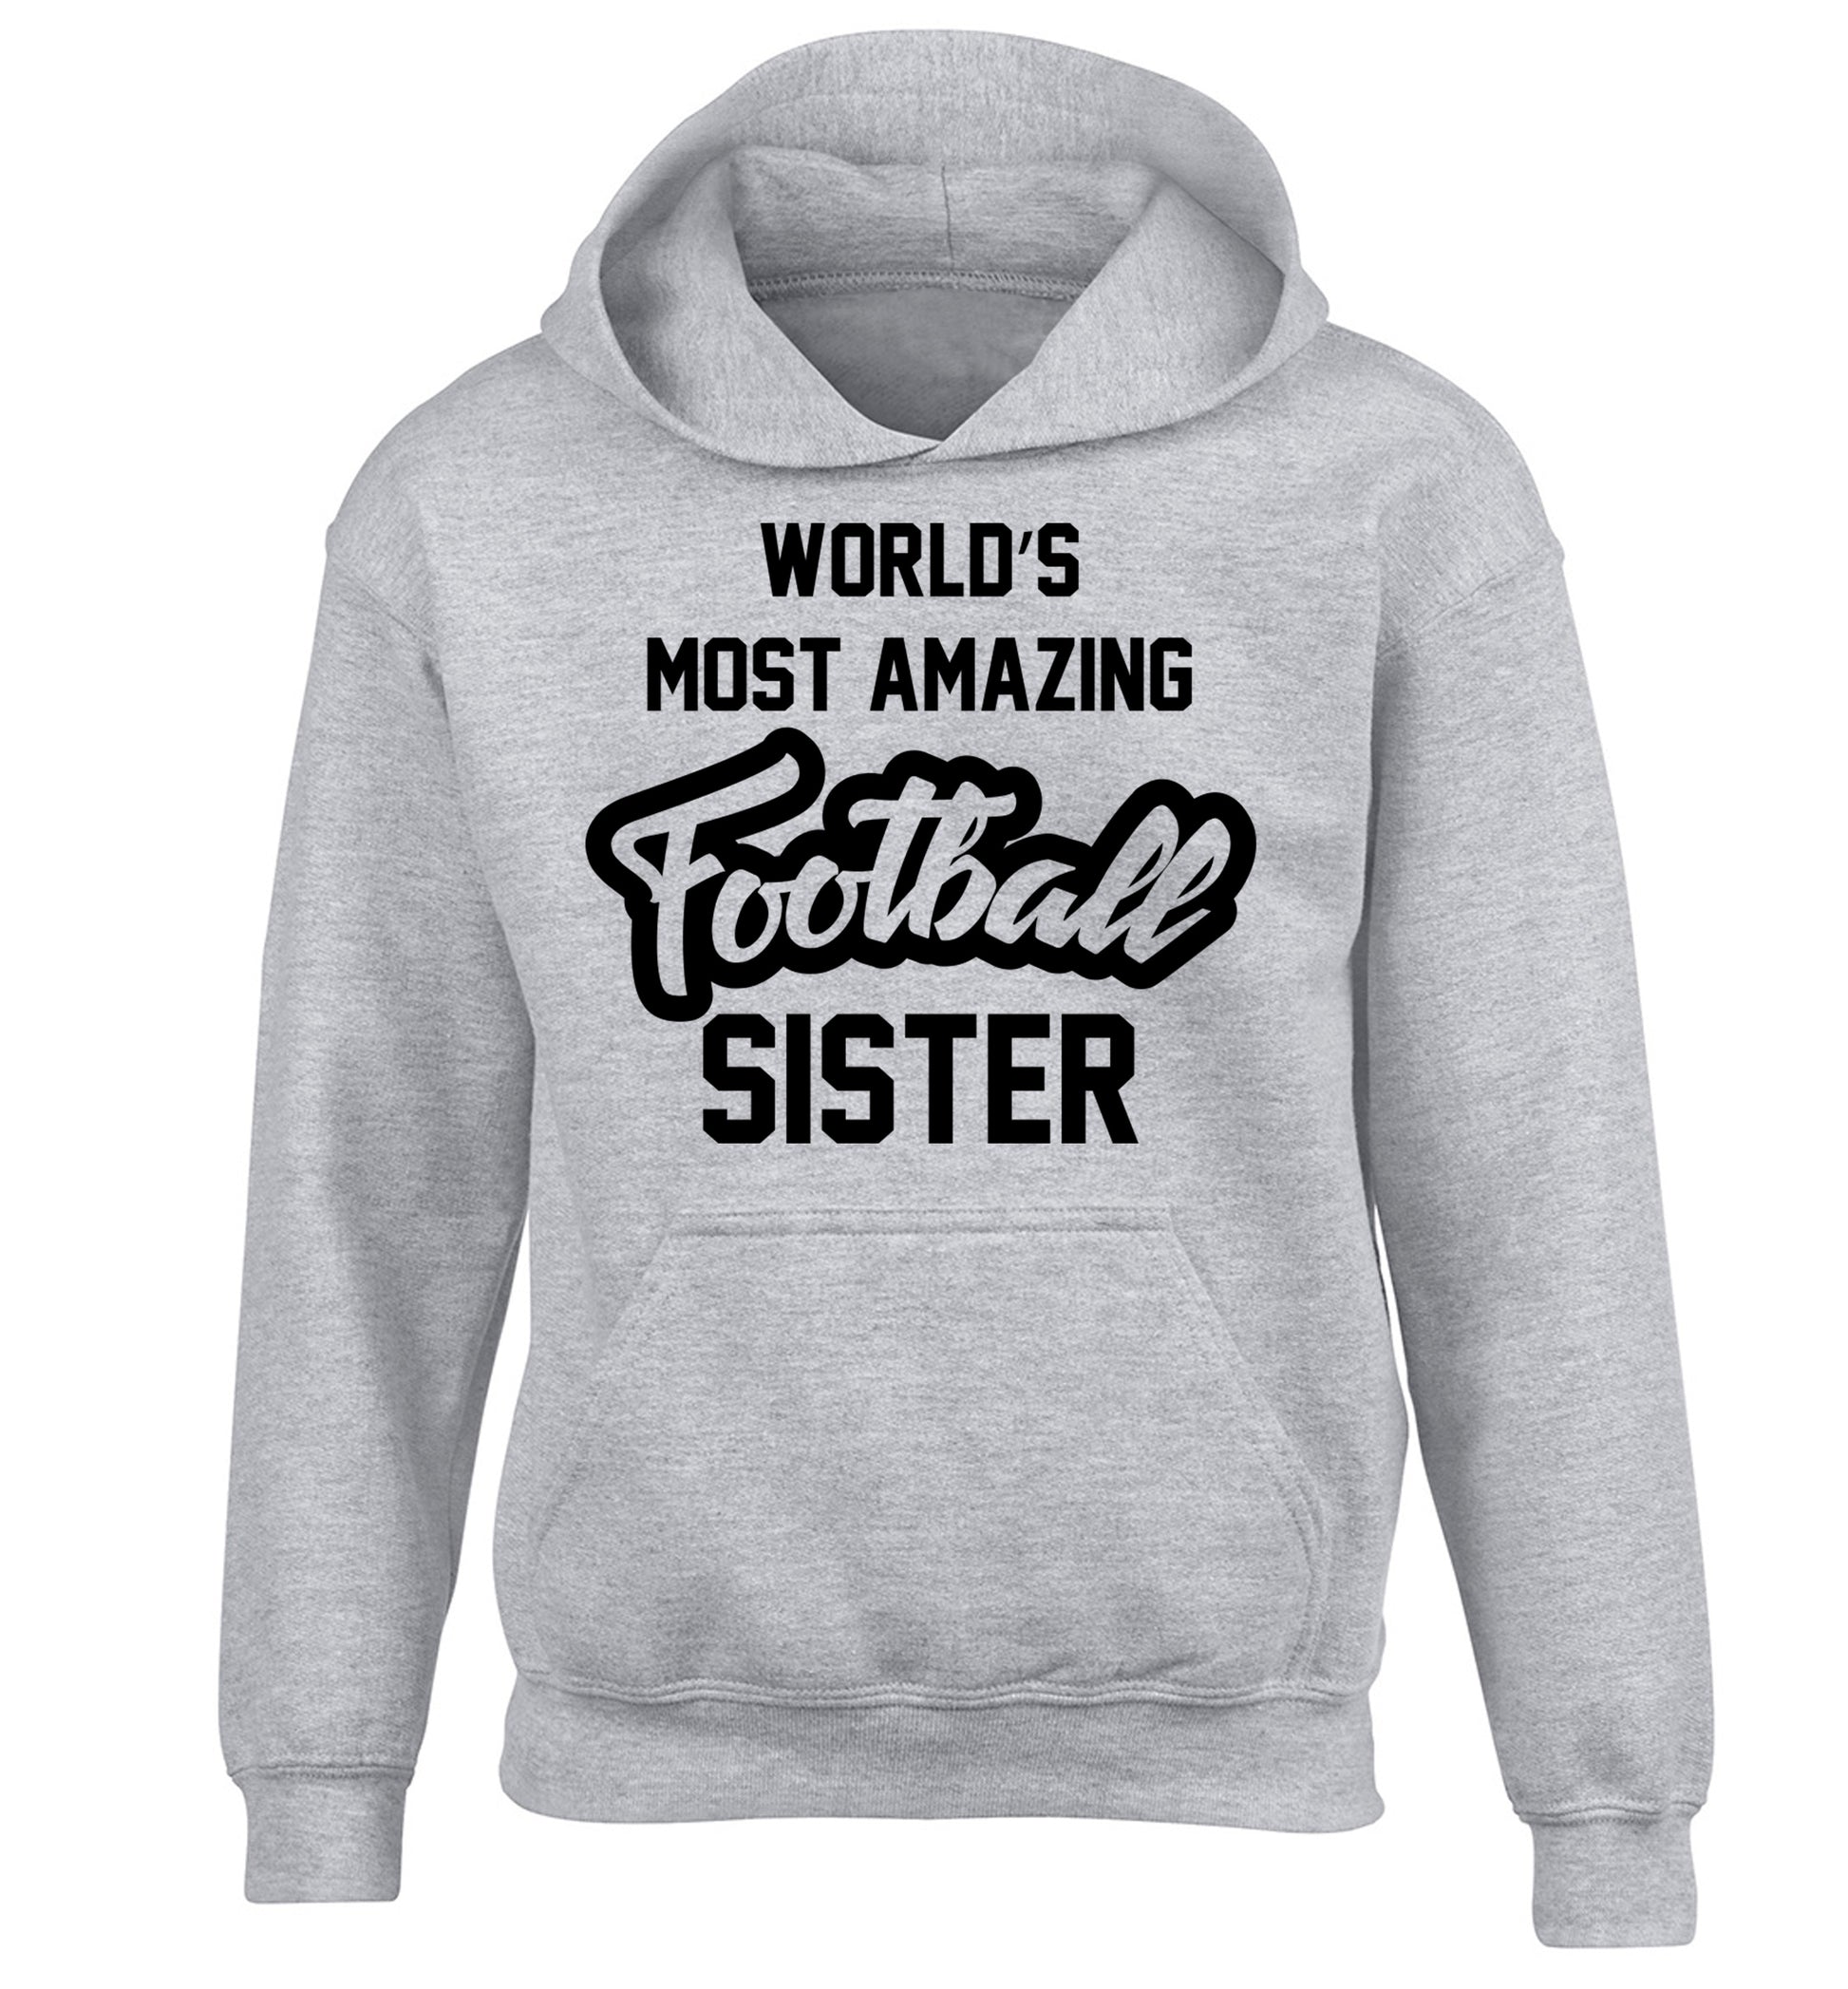 Worlds most amazing football sister children's grey hoodie 12-14 Years